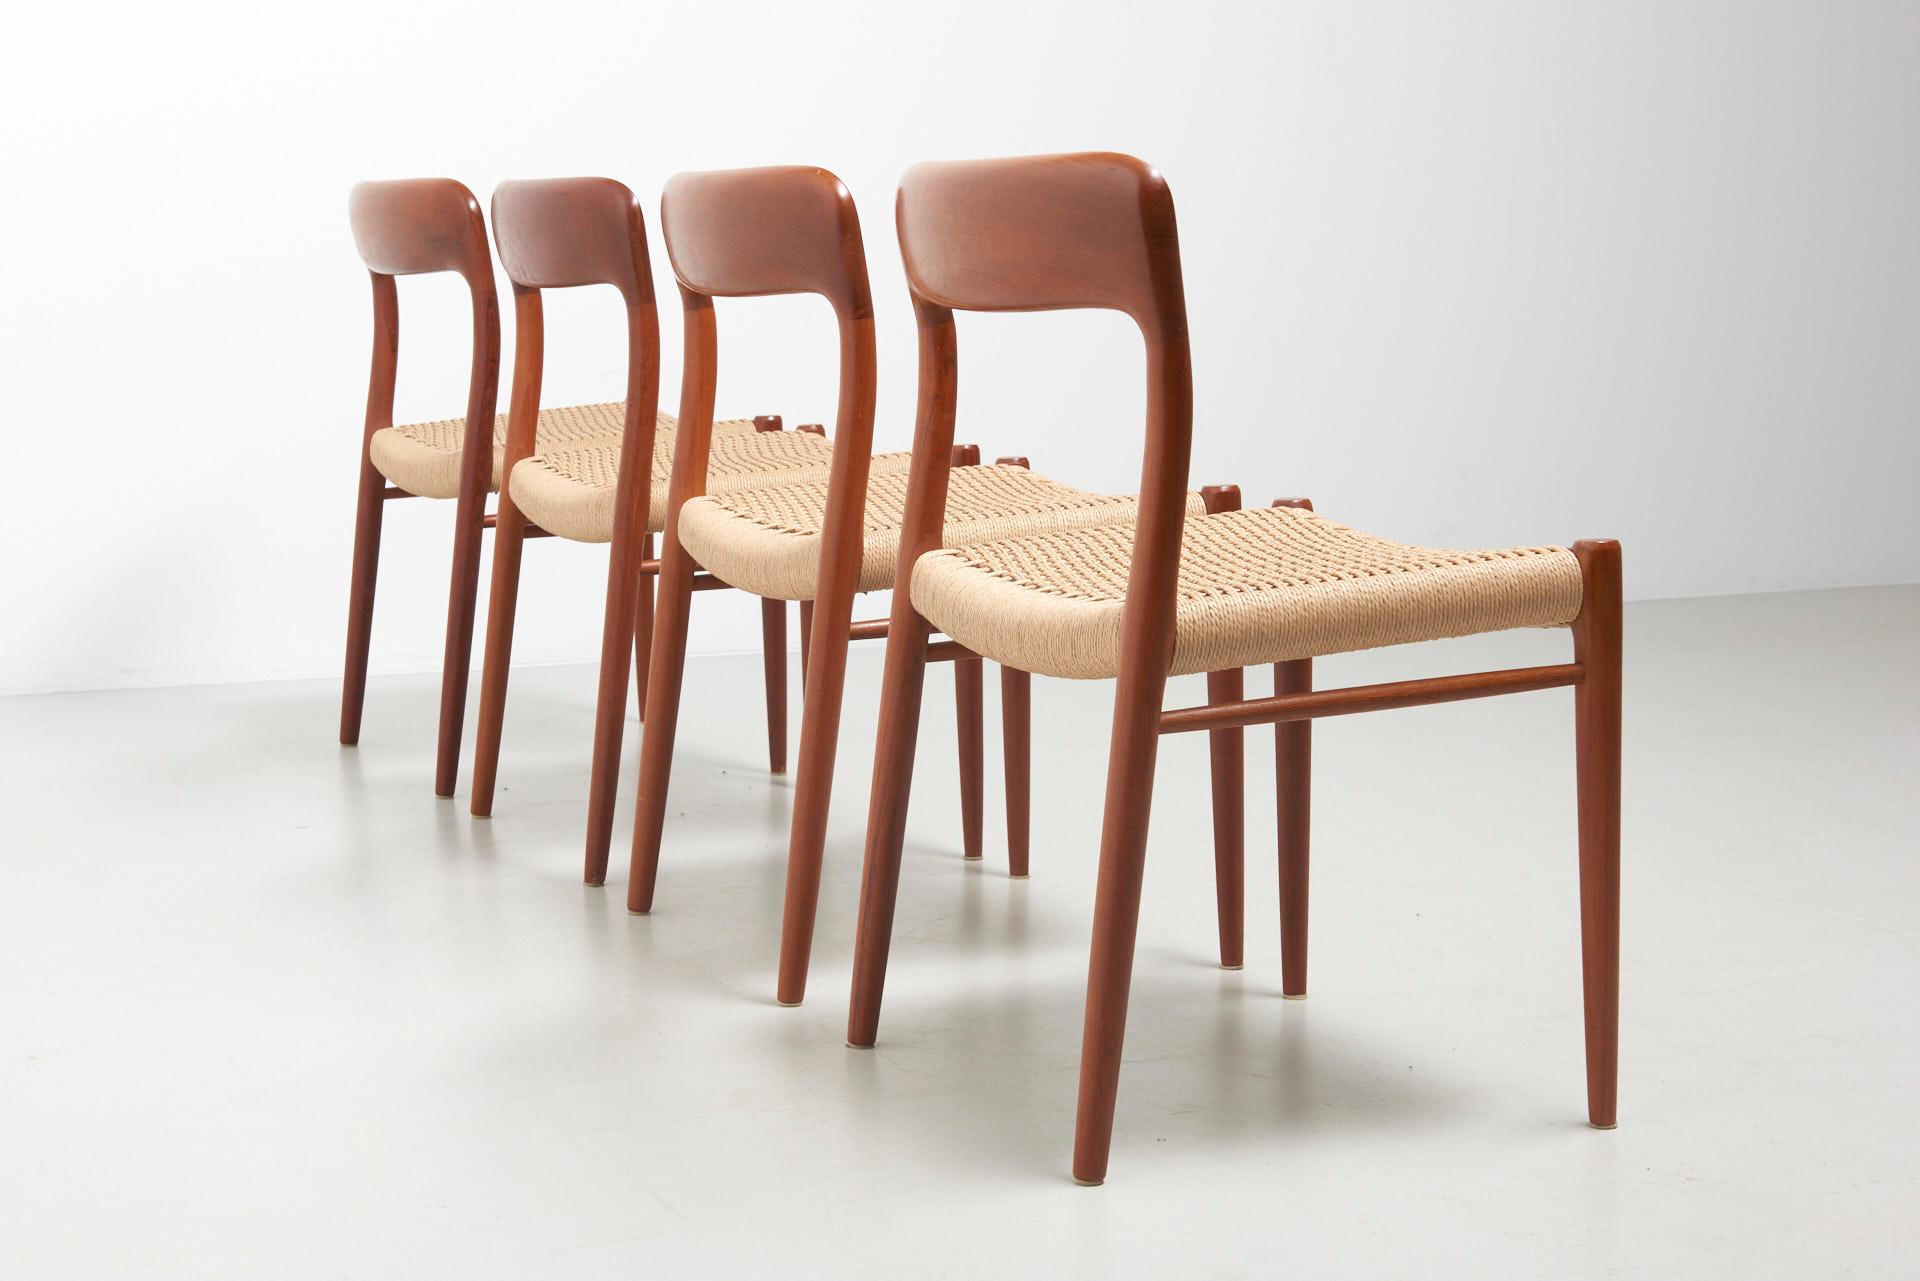 Set of 4 dining chairs in teak with carved backrests. Model 75, designed by Niels O. Møller in 1954. Made by J.L. Møllers Møbelfabrik in Denmark. The chairs have new papercord seats.